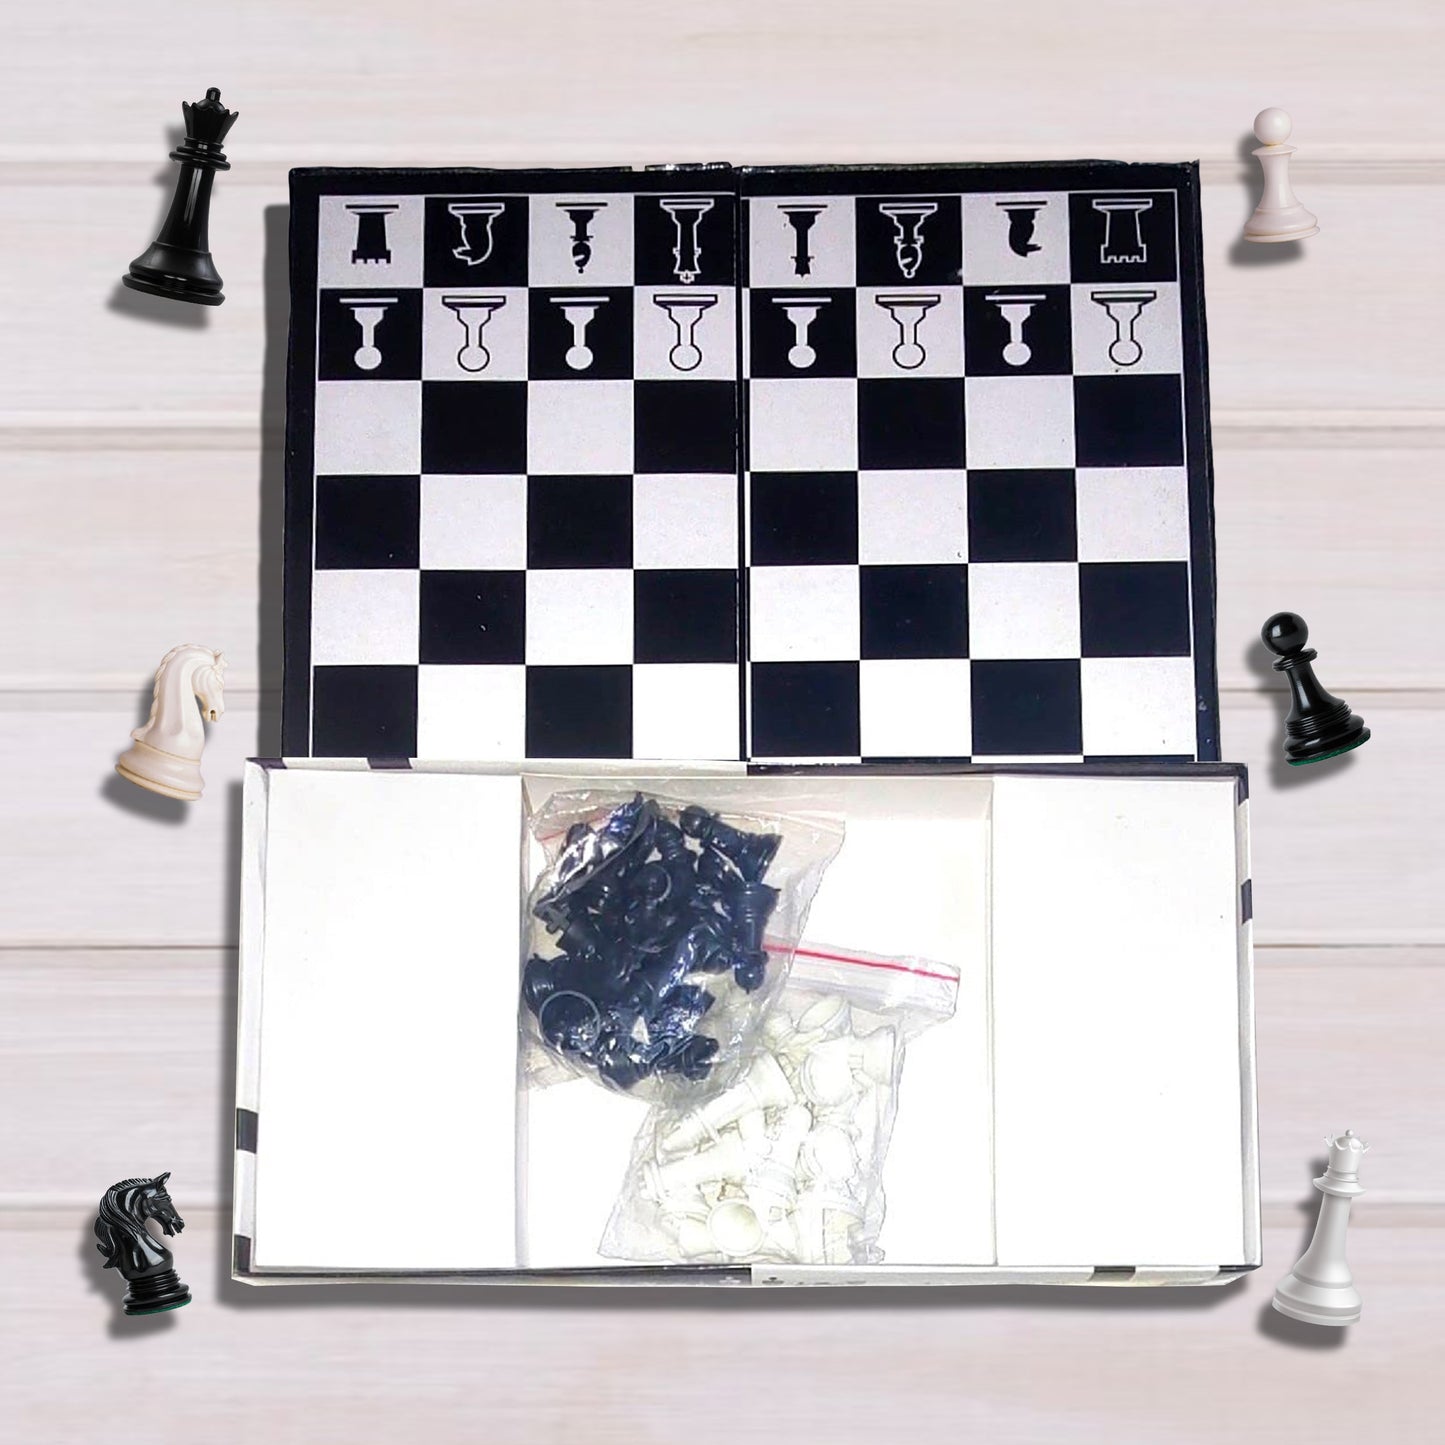 Chess Strategy & War Board Games(12 inches) Chess Board